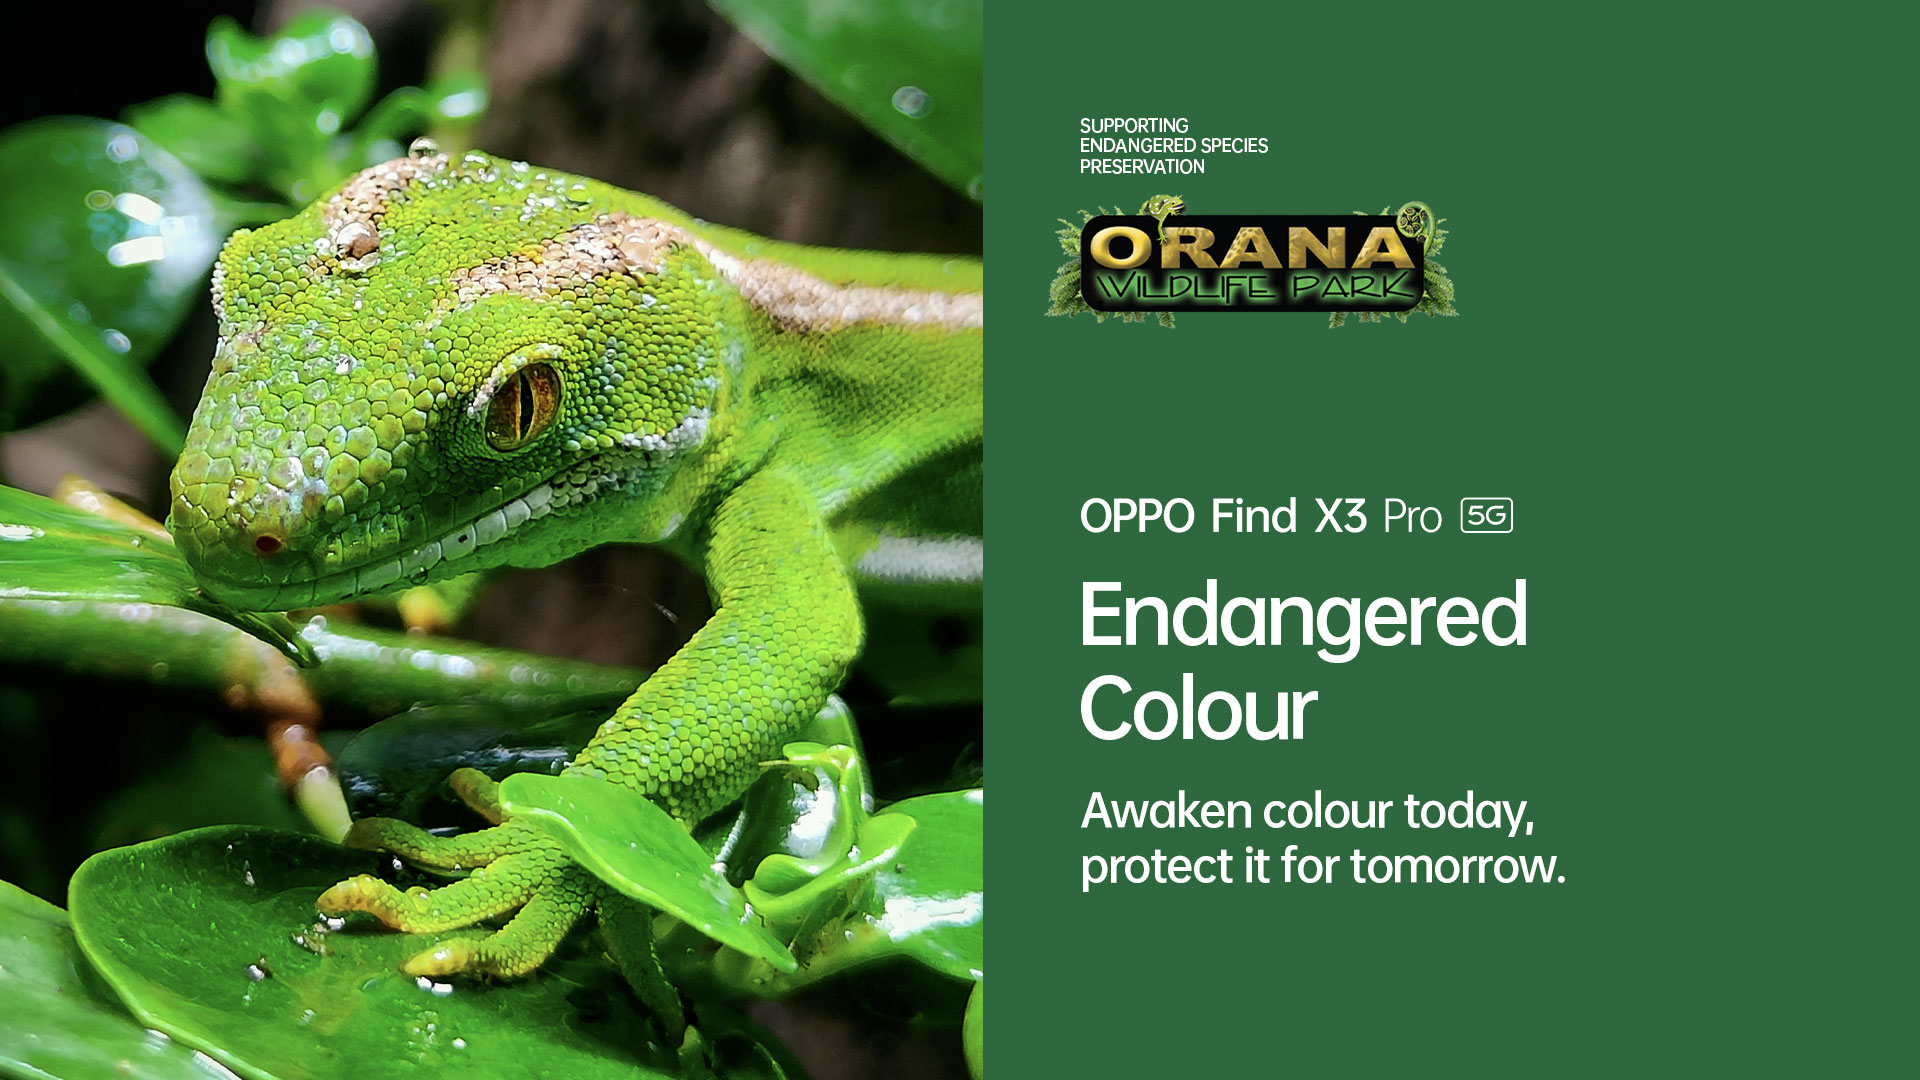 Endangered Colour with Orana Wildlife Park and OPPO